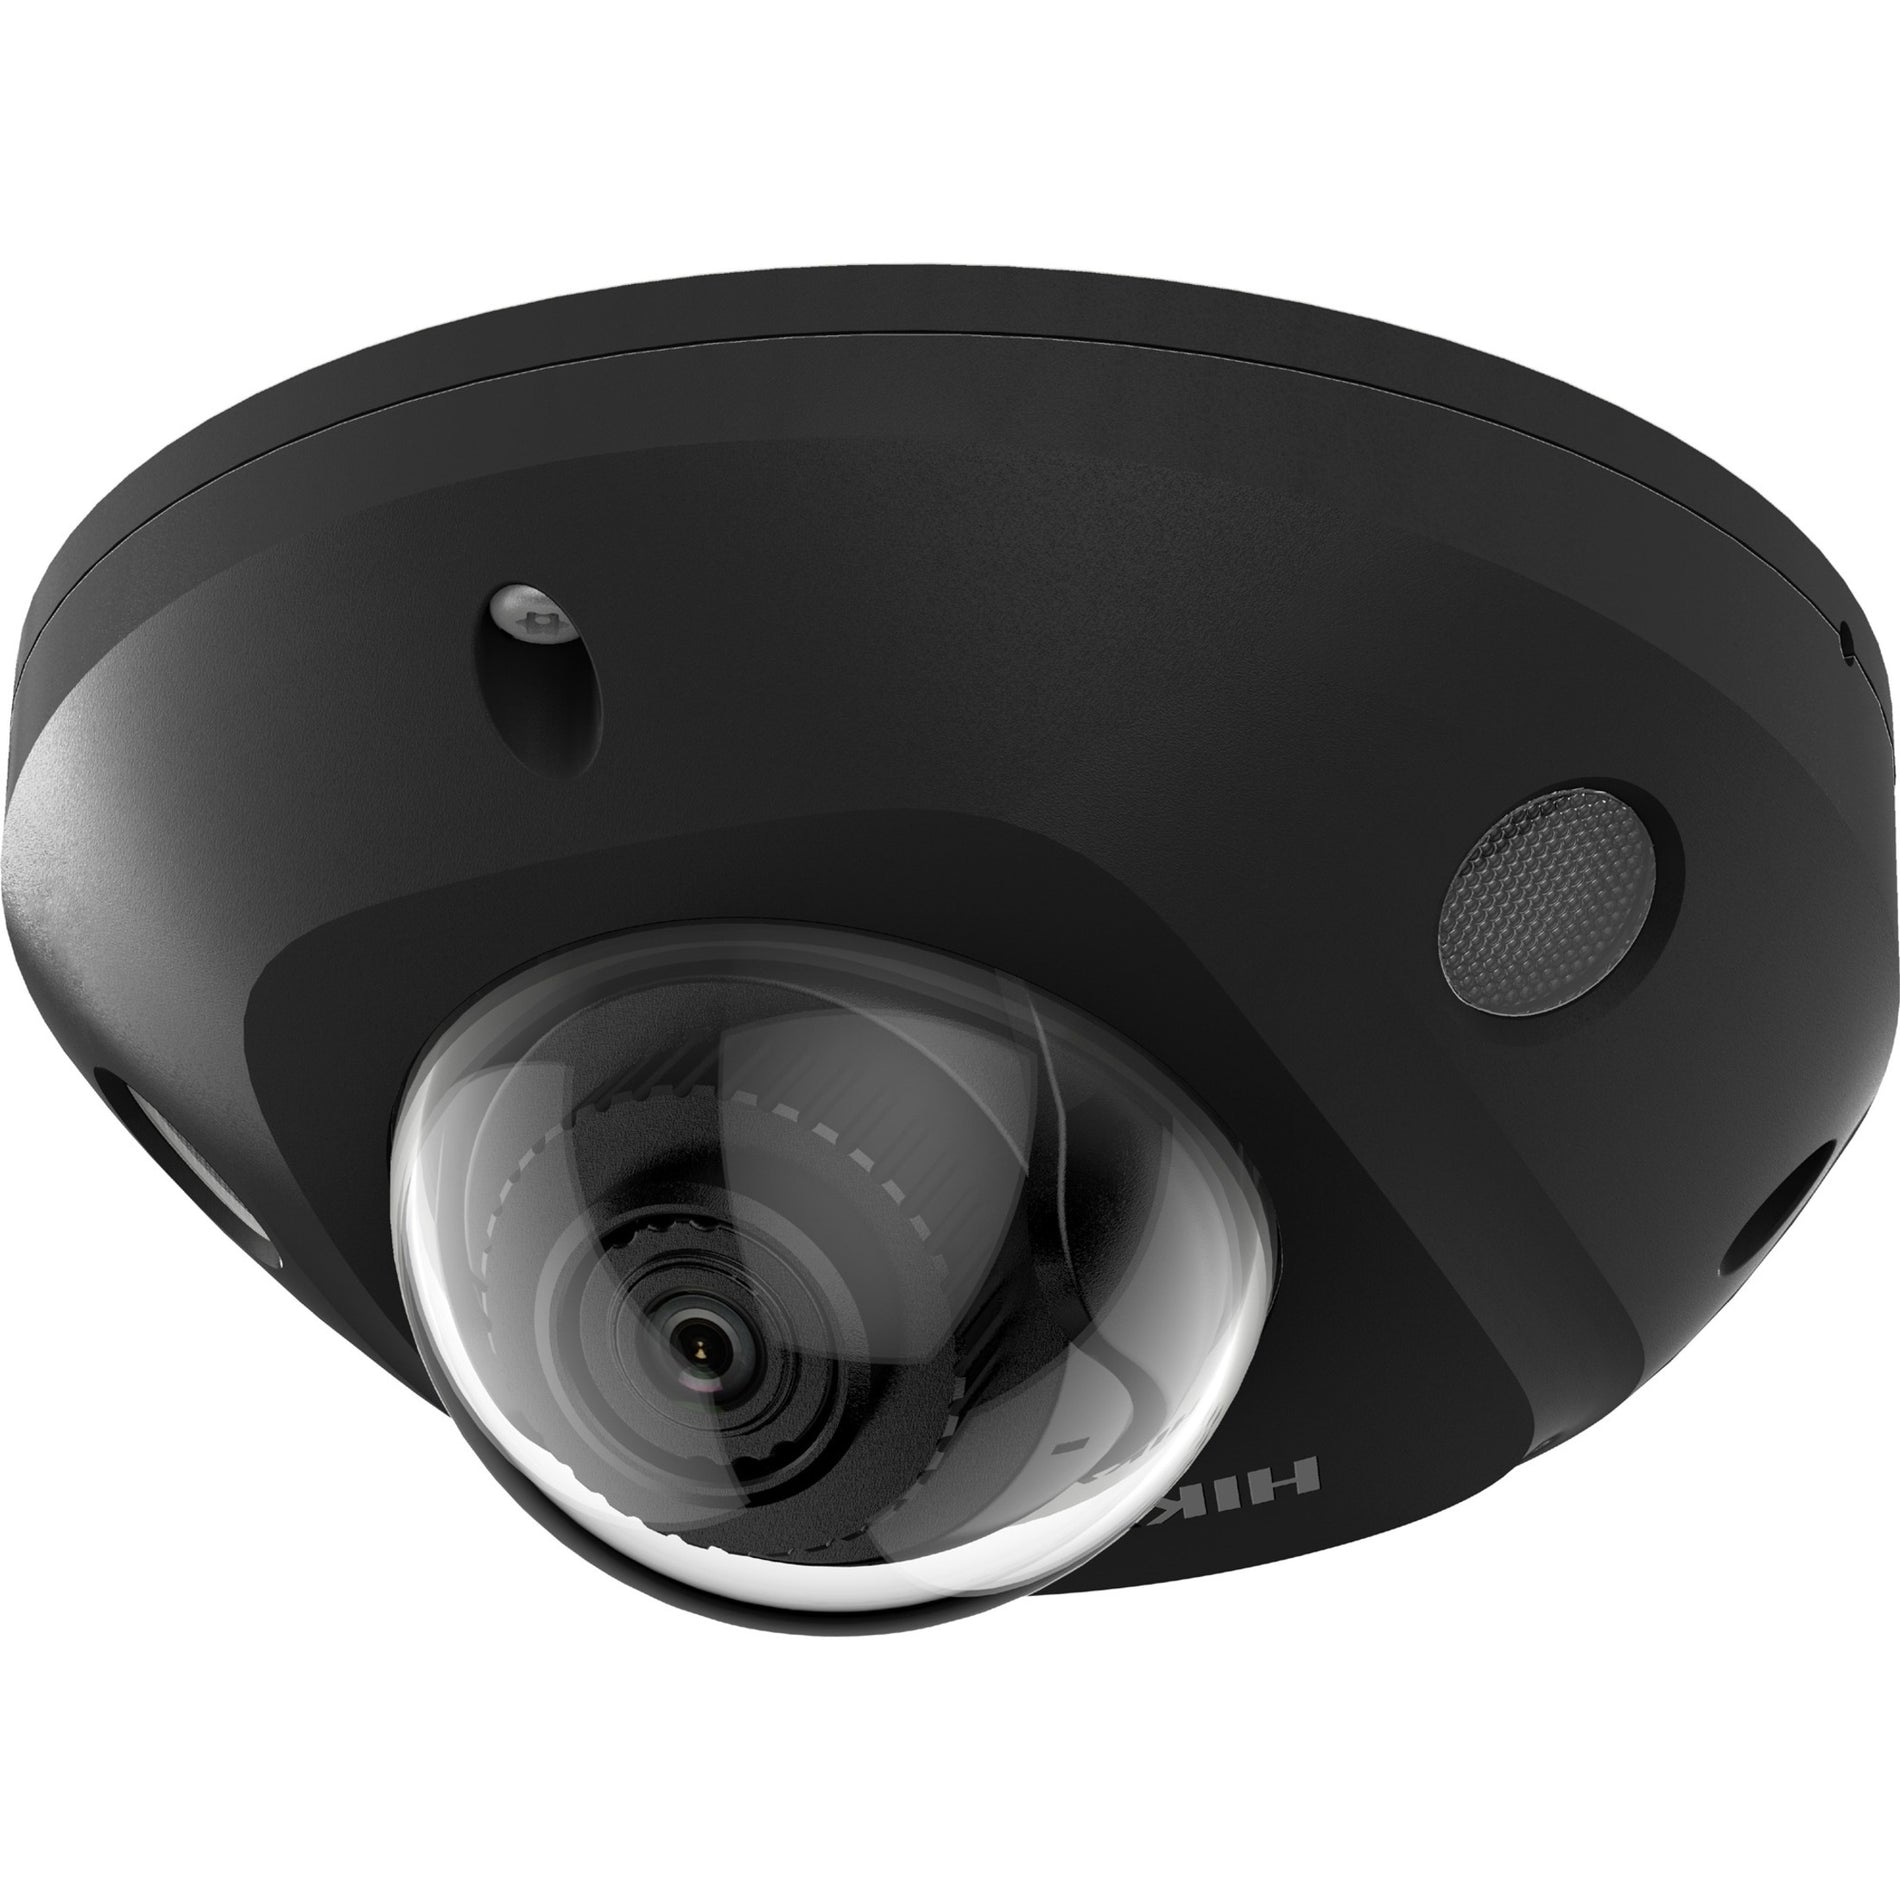 Hikvision DS-2CD2543G2-IS 2.8MM 4 MP AcuSense Built-in Mic Fixed Mini Dome Network Camera, 2.8mm Lens, 2688 x 1520 Resolution, Night Vision